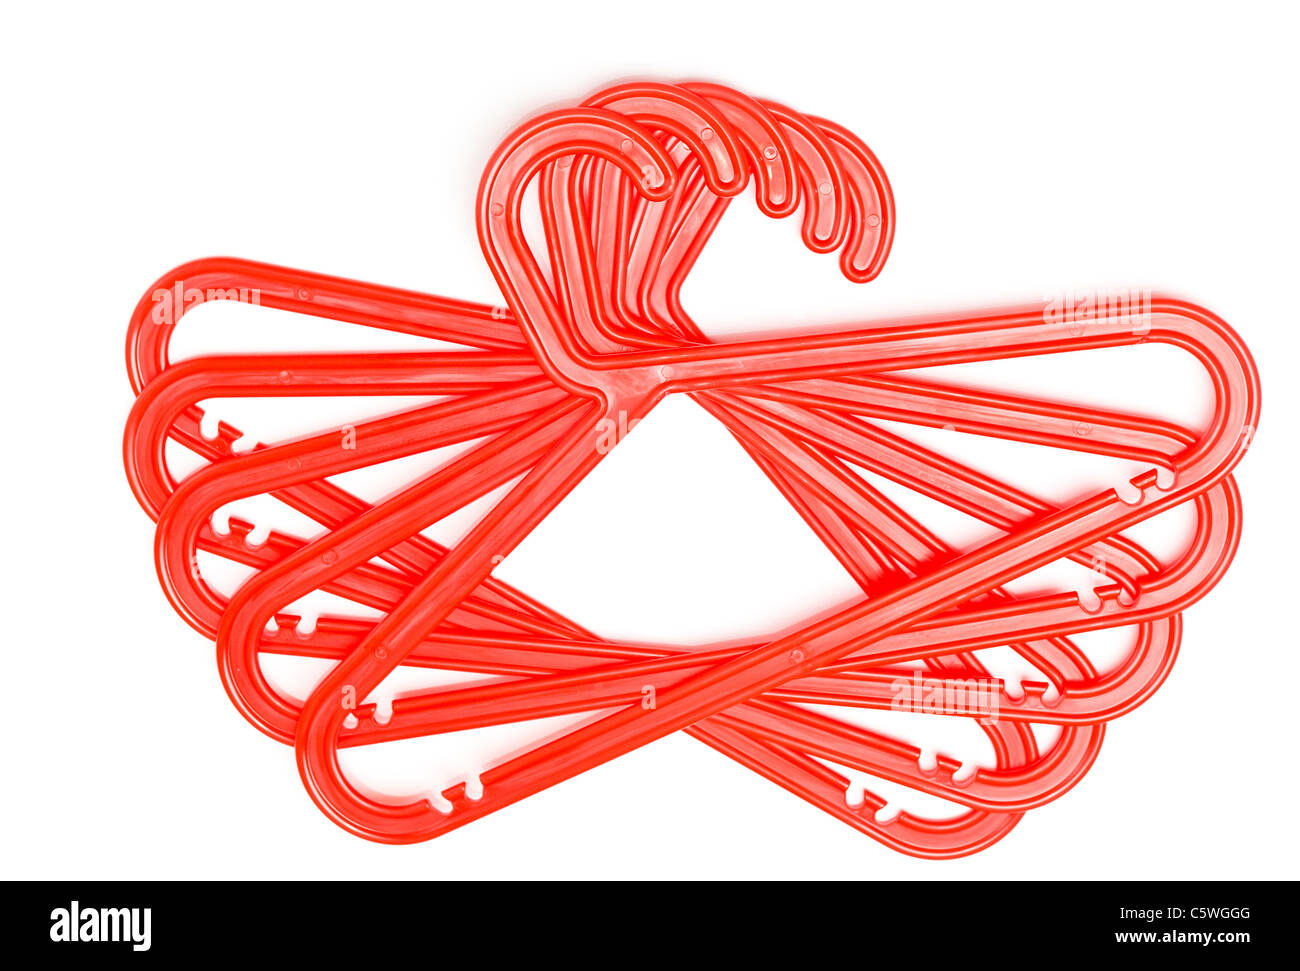 Bright red plastic coat hanger for hanger clothes Stock Photo